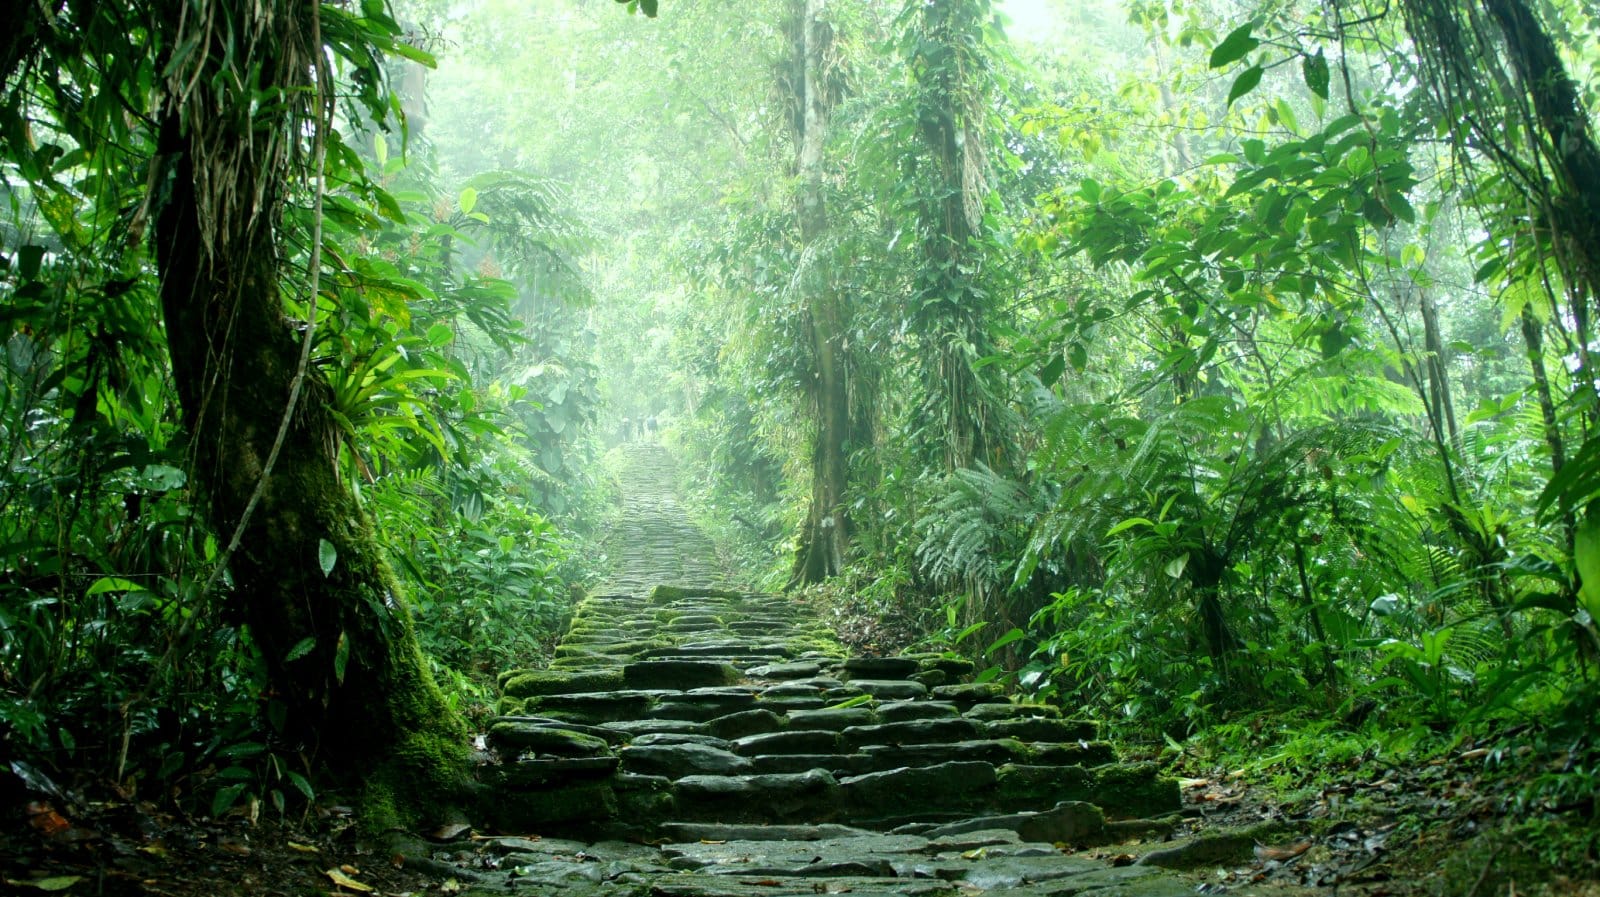 <p class="wp-caption-text">Image Credit: Shutterstock / dunn4040</p>  <p>Embark on a challenging trek through the dense jungles of Colombia to reach the ancient ruins of Ciudad Perdida, the “Lost City” of the Tayrona civilization. Discover hidden terraces, ceremonial plazas, and intricate stone carvings as you unravel the mysteries of this archaeological wonder hidden deep in the Sierra Nevada mountains.</p>